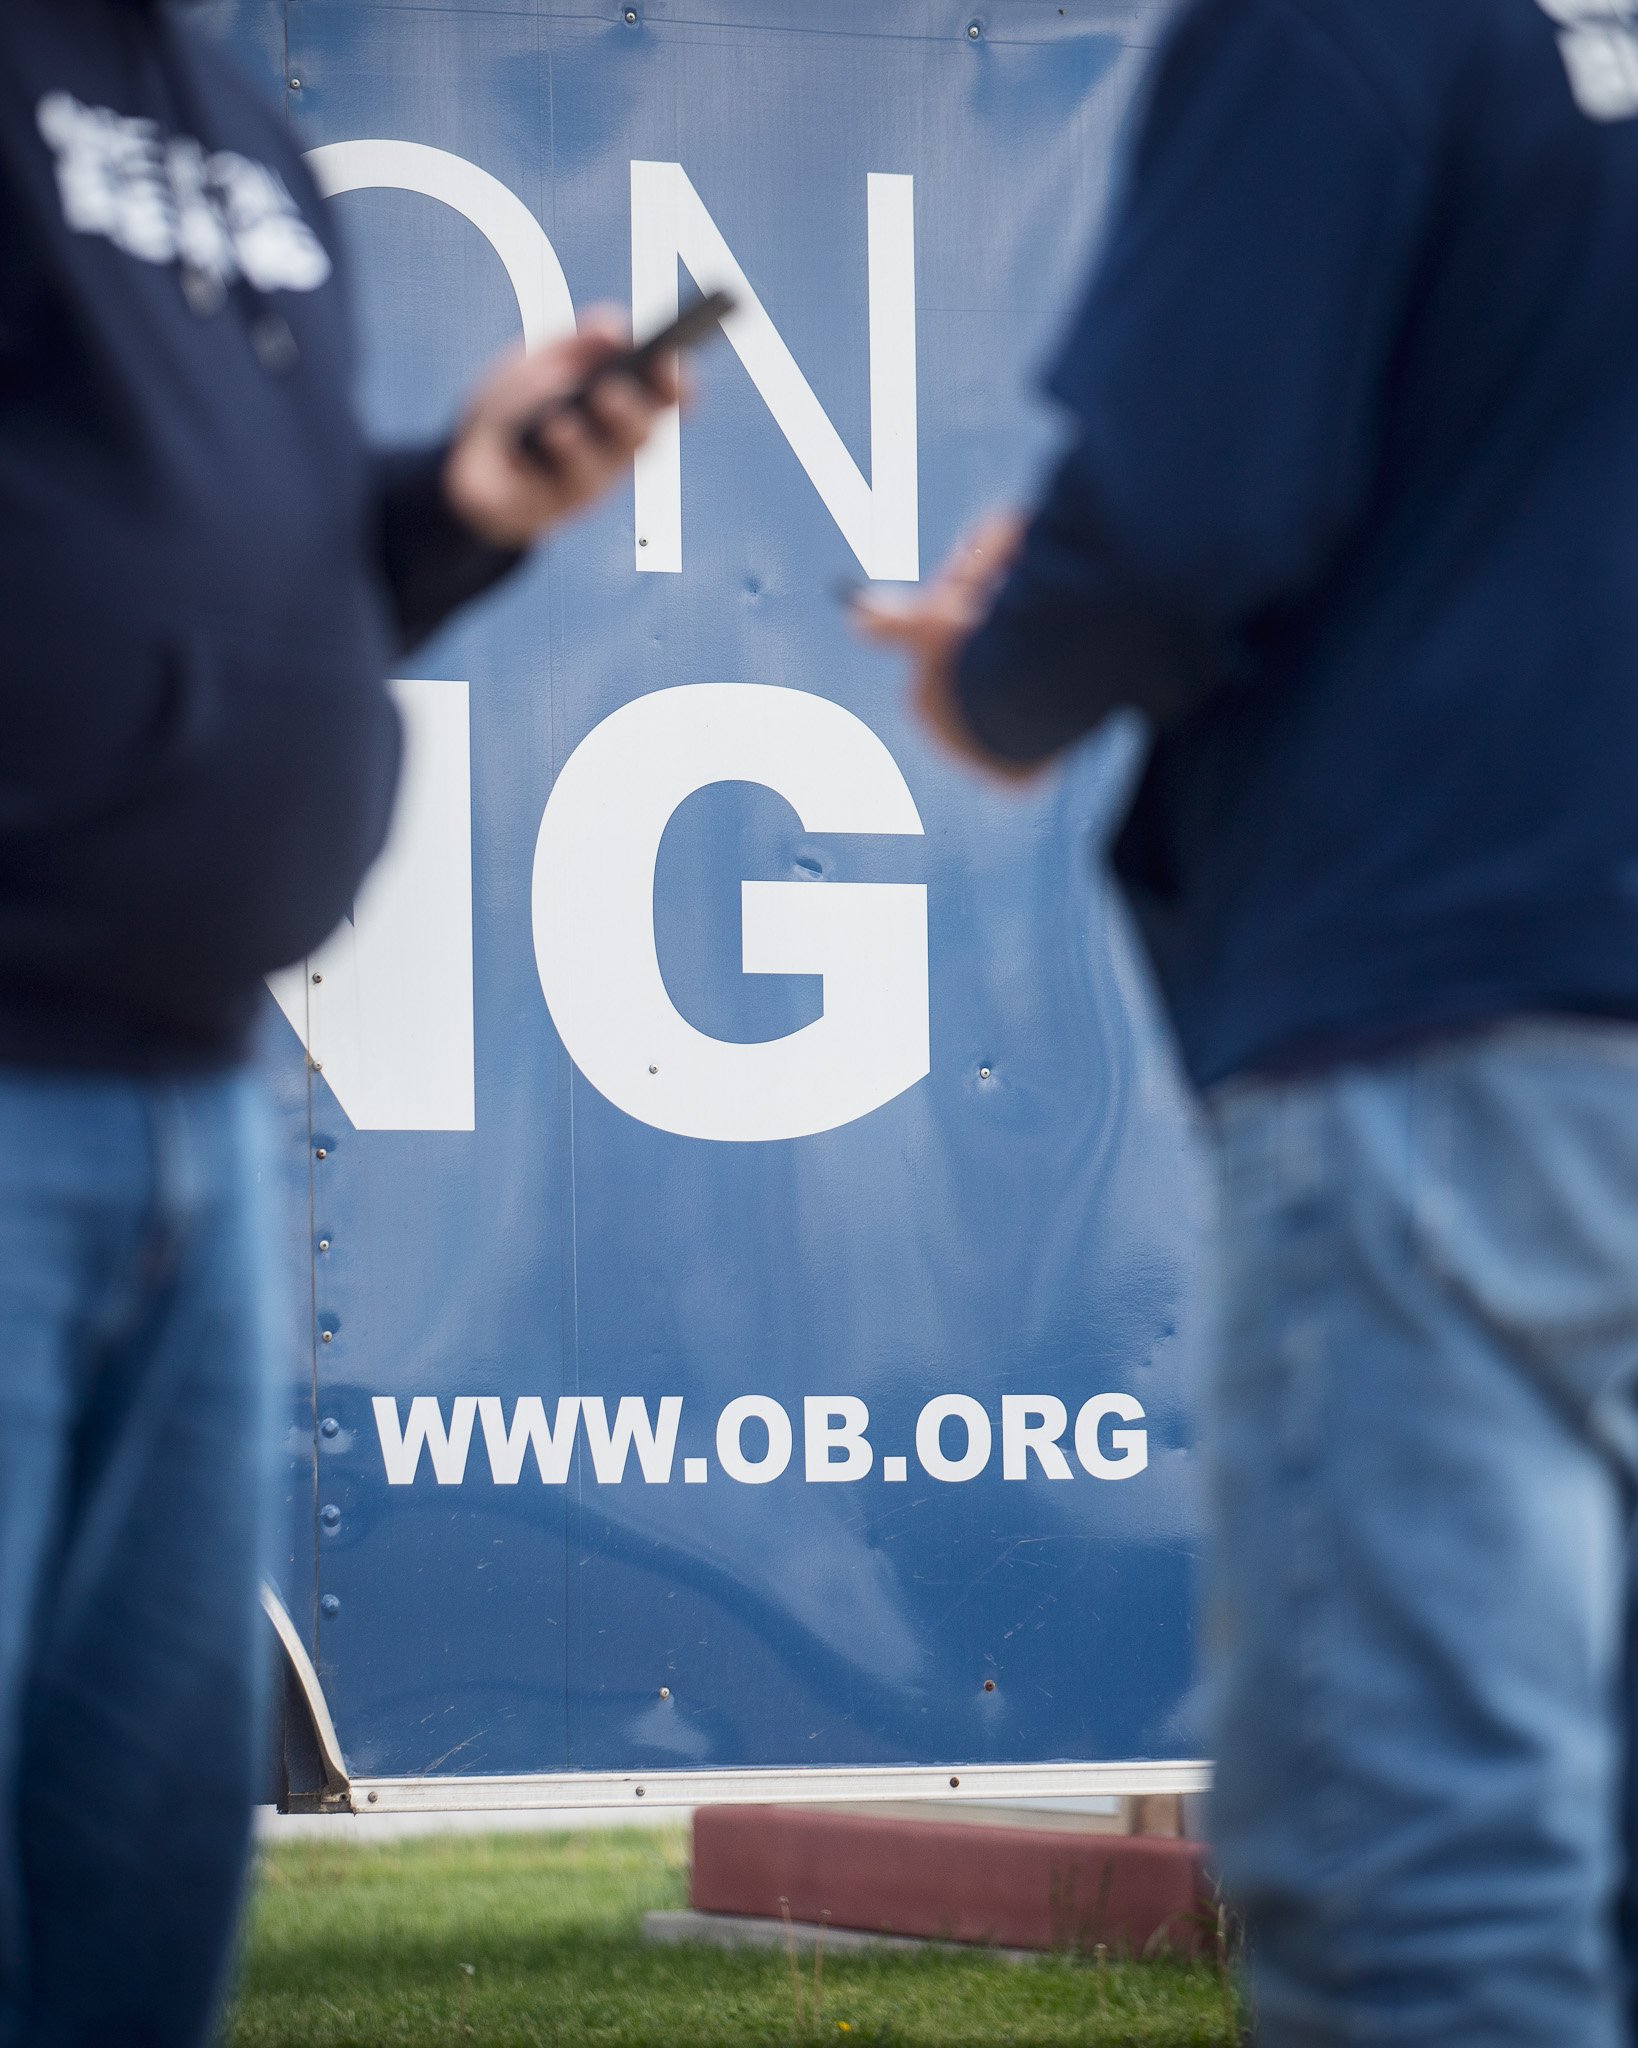 Like you, we are blown away by the tremendous response from so many wanting to help! As we have been praying about the best way to contribute to the recovery efforts, this morning we received a call from Operation Blessing (www.ob.org), asking if the